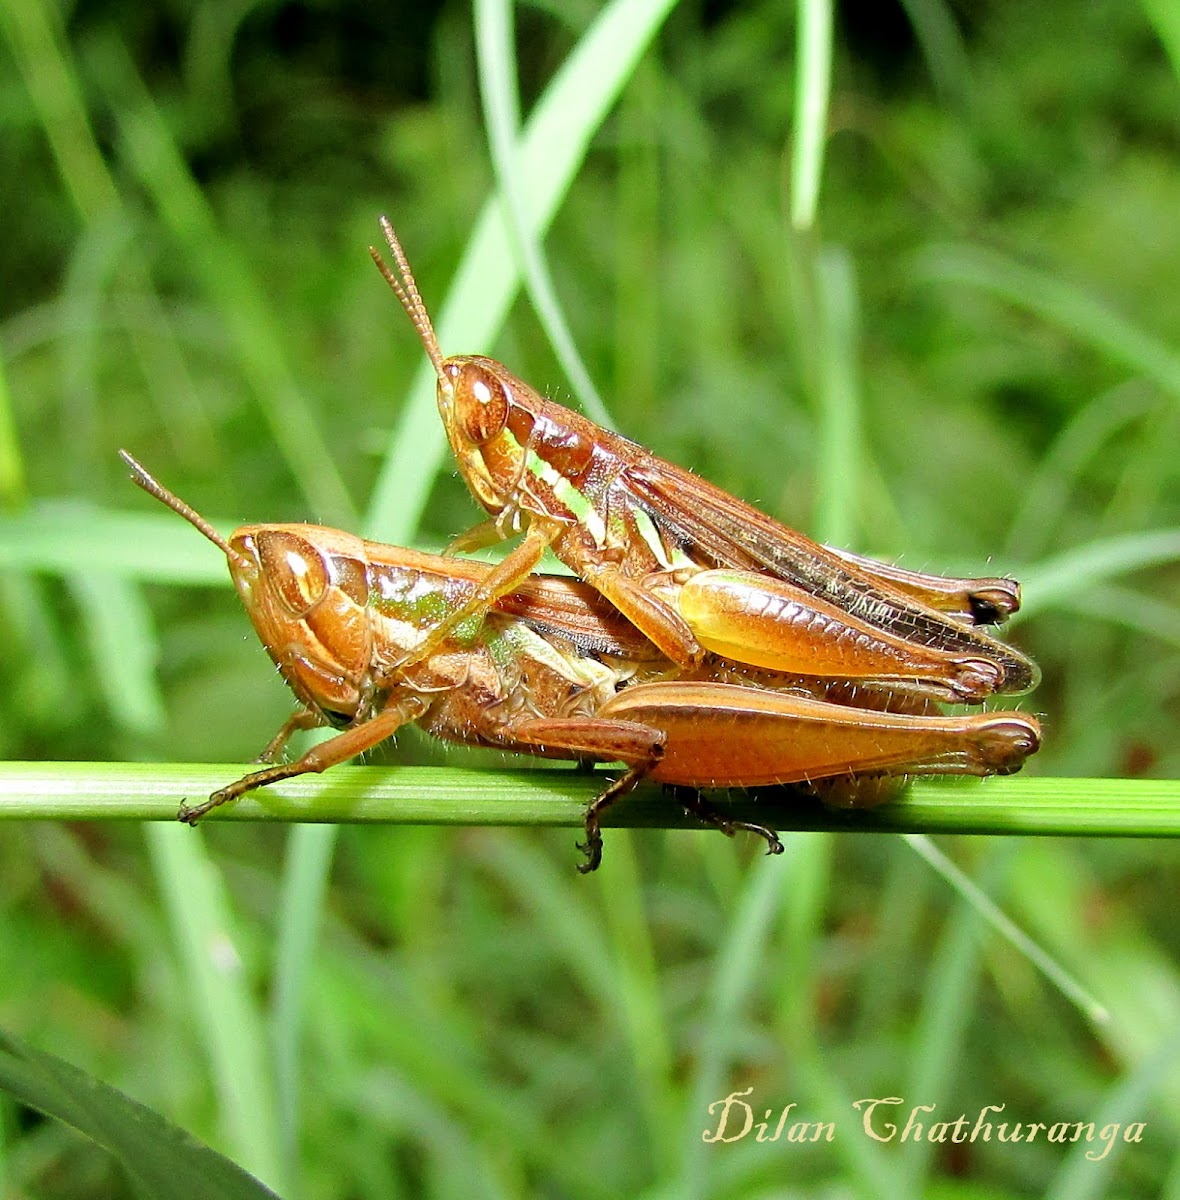 Mating of Grasshoppers